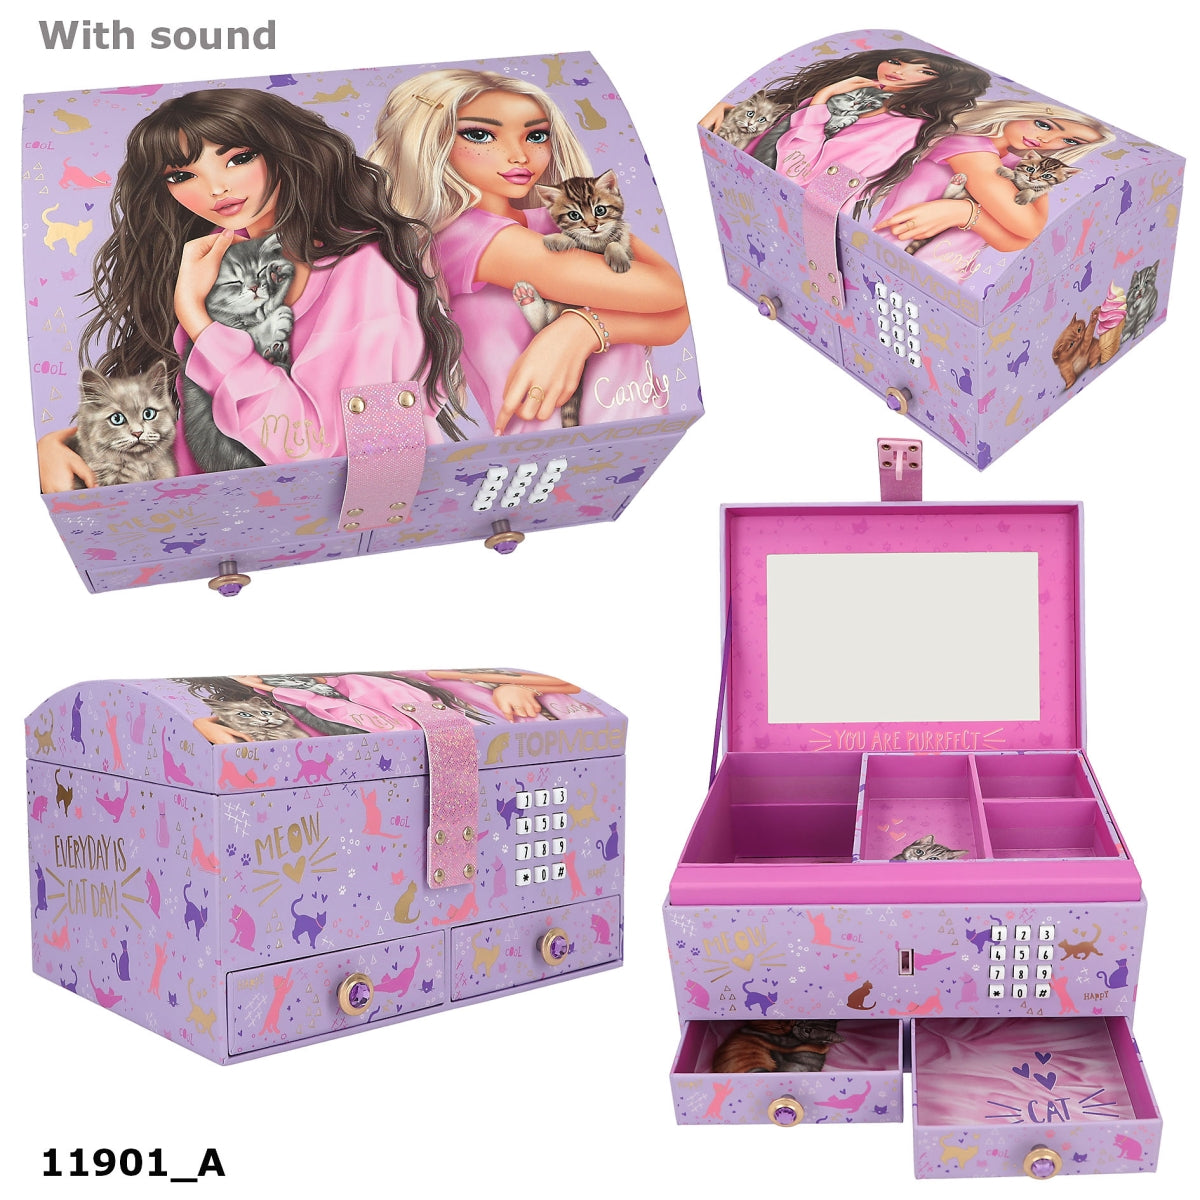 TOP MODEL BIG JEWELLERY BOX WITH CODE AND SOUNDS